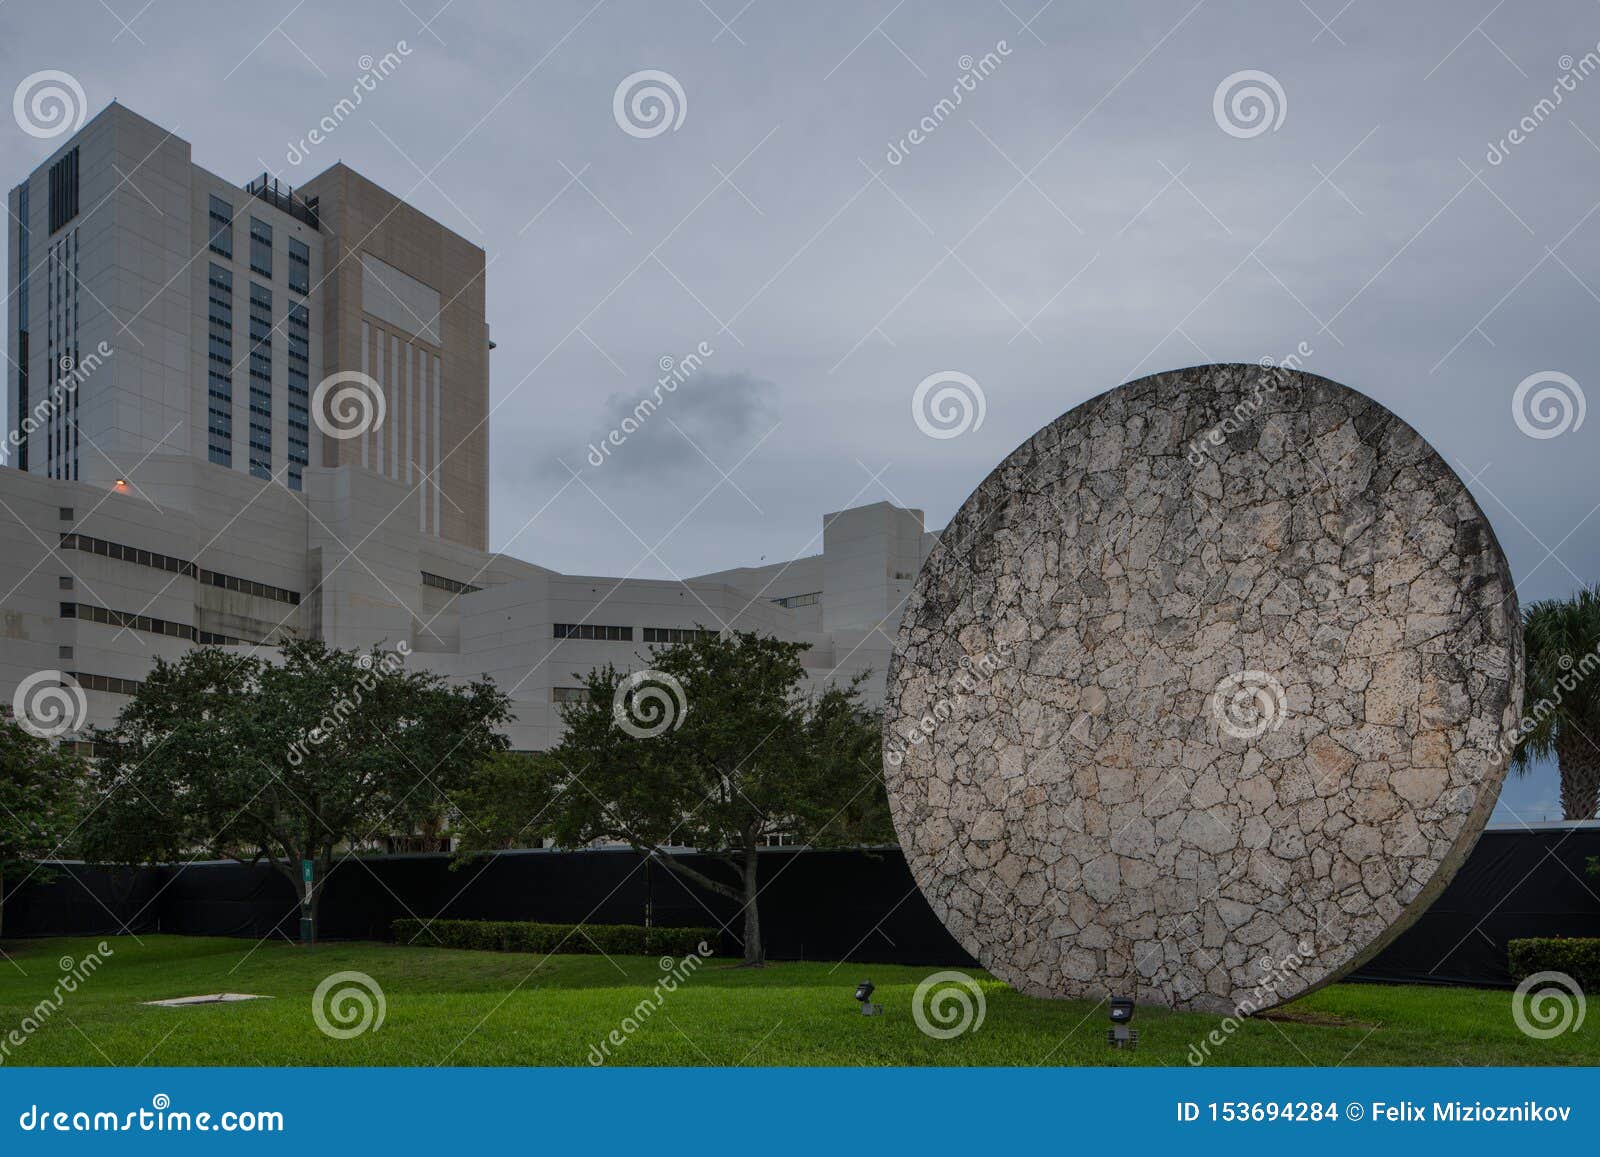 landscape at broward county courthouse fort lauderdale fl